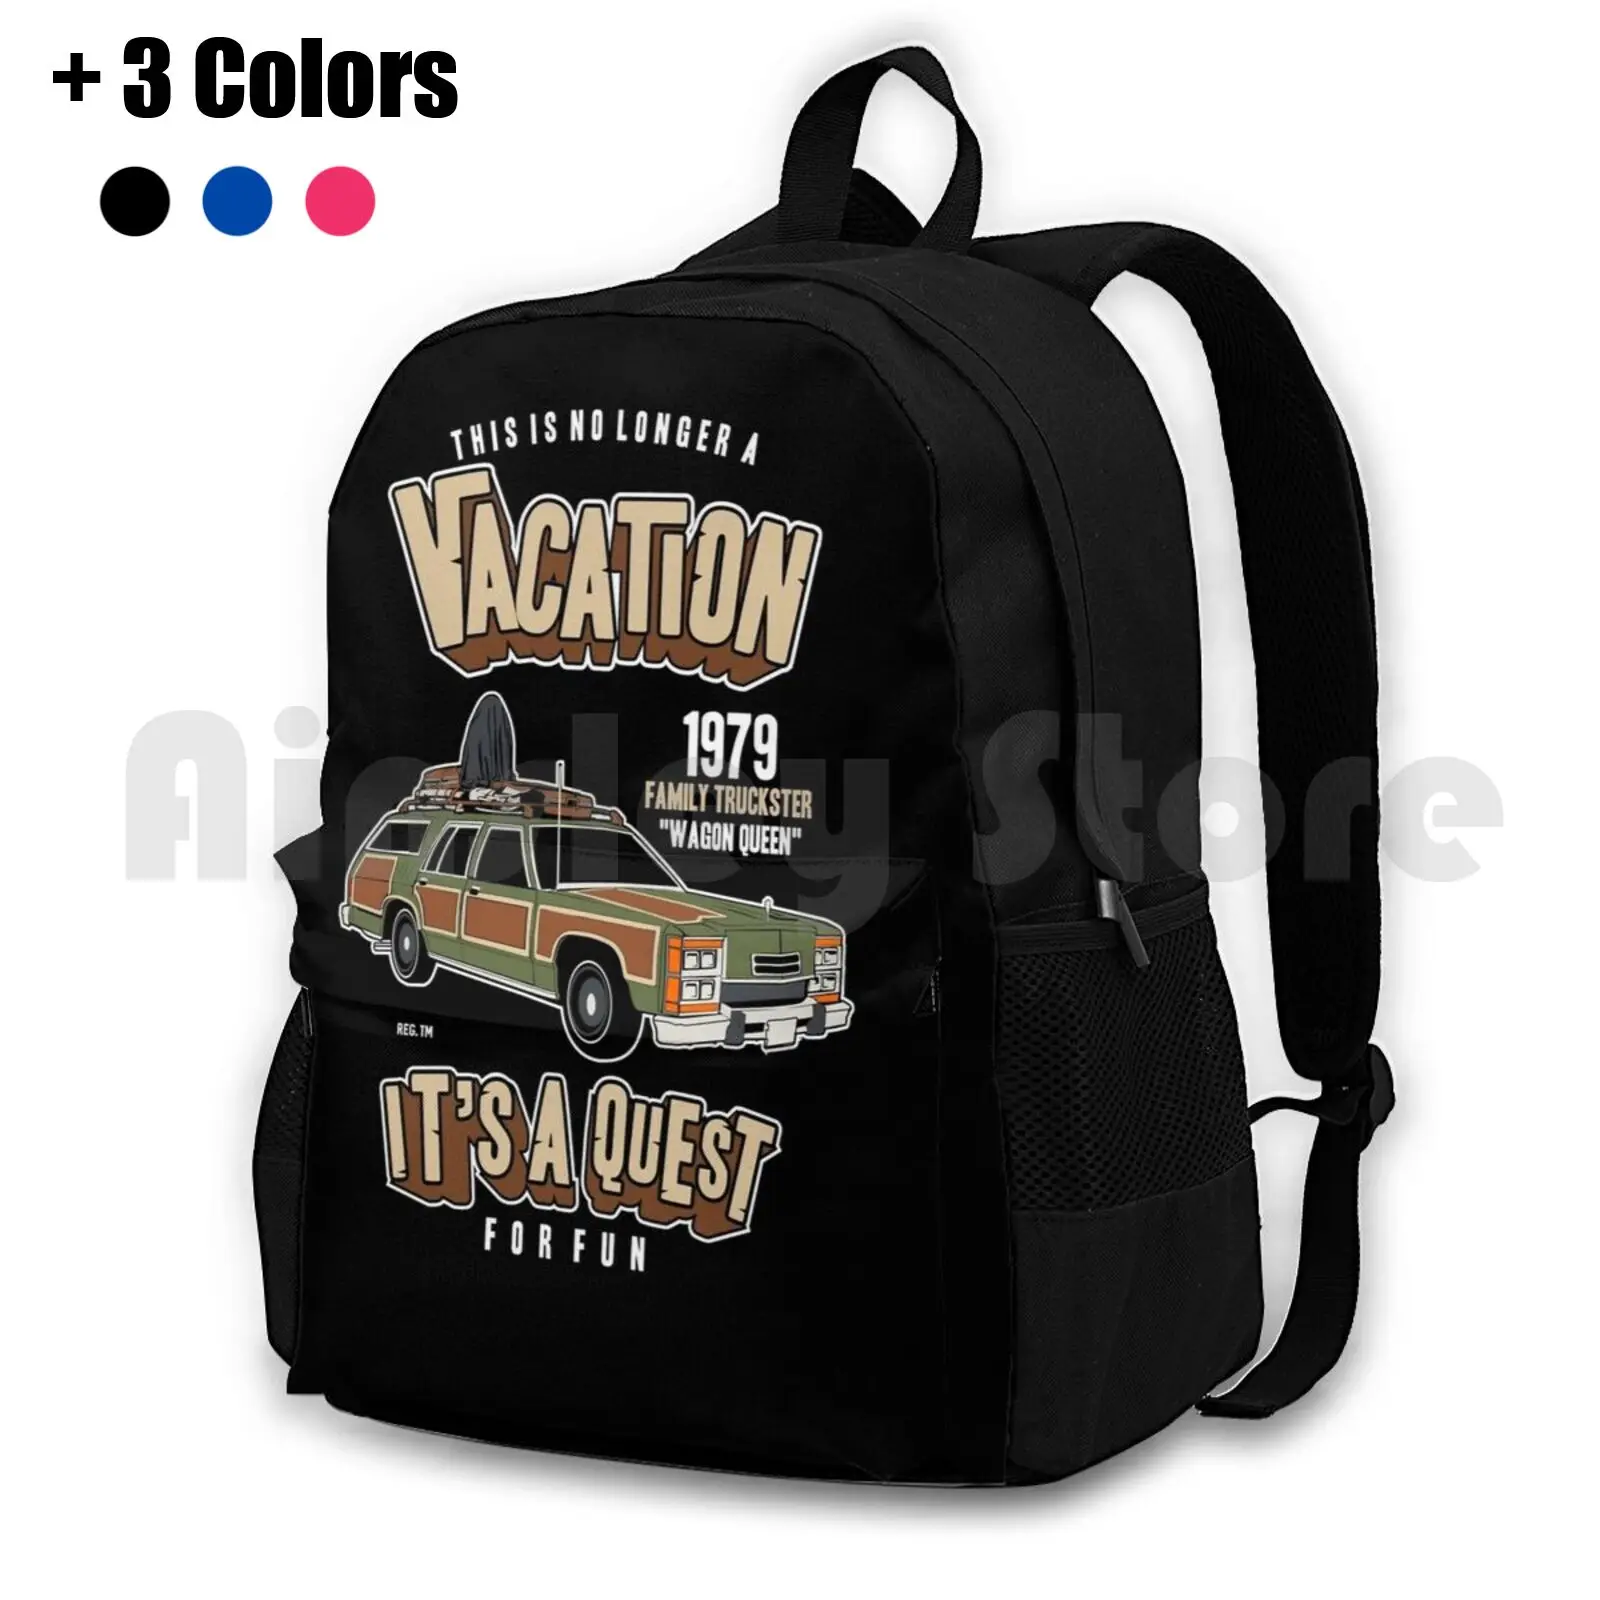 

Vacation Outdoor Hiking Backpack Waterproof Camping Travel Griswold Chevy Chase National Lampoon Vacation Holiday Team Truck